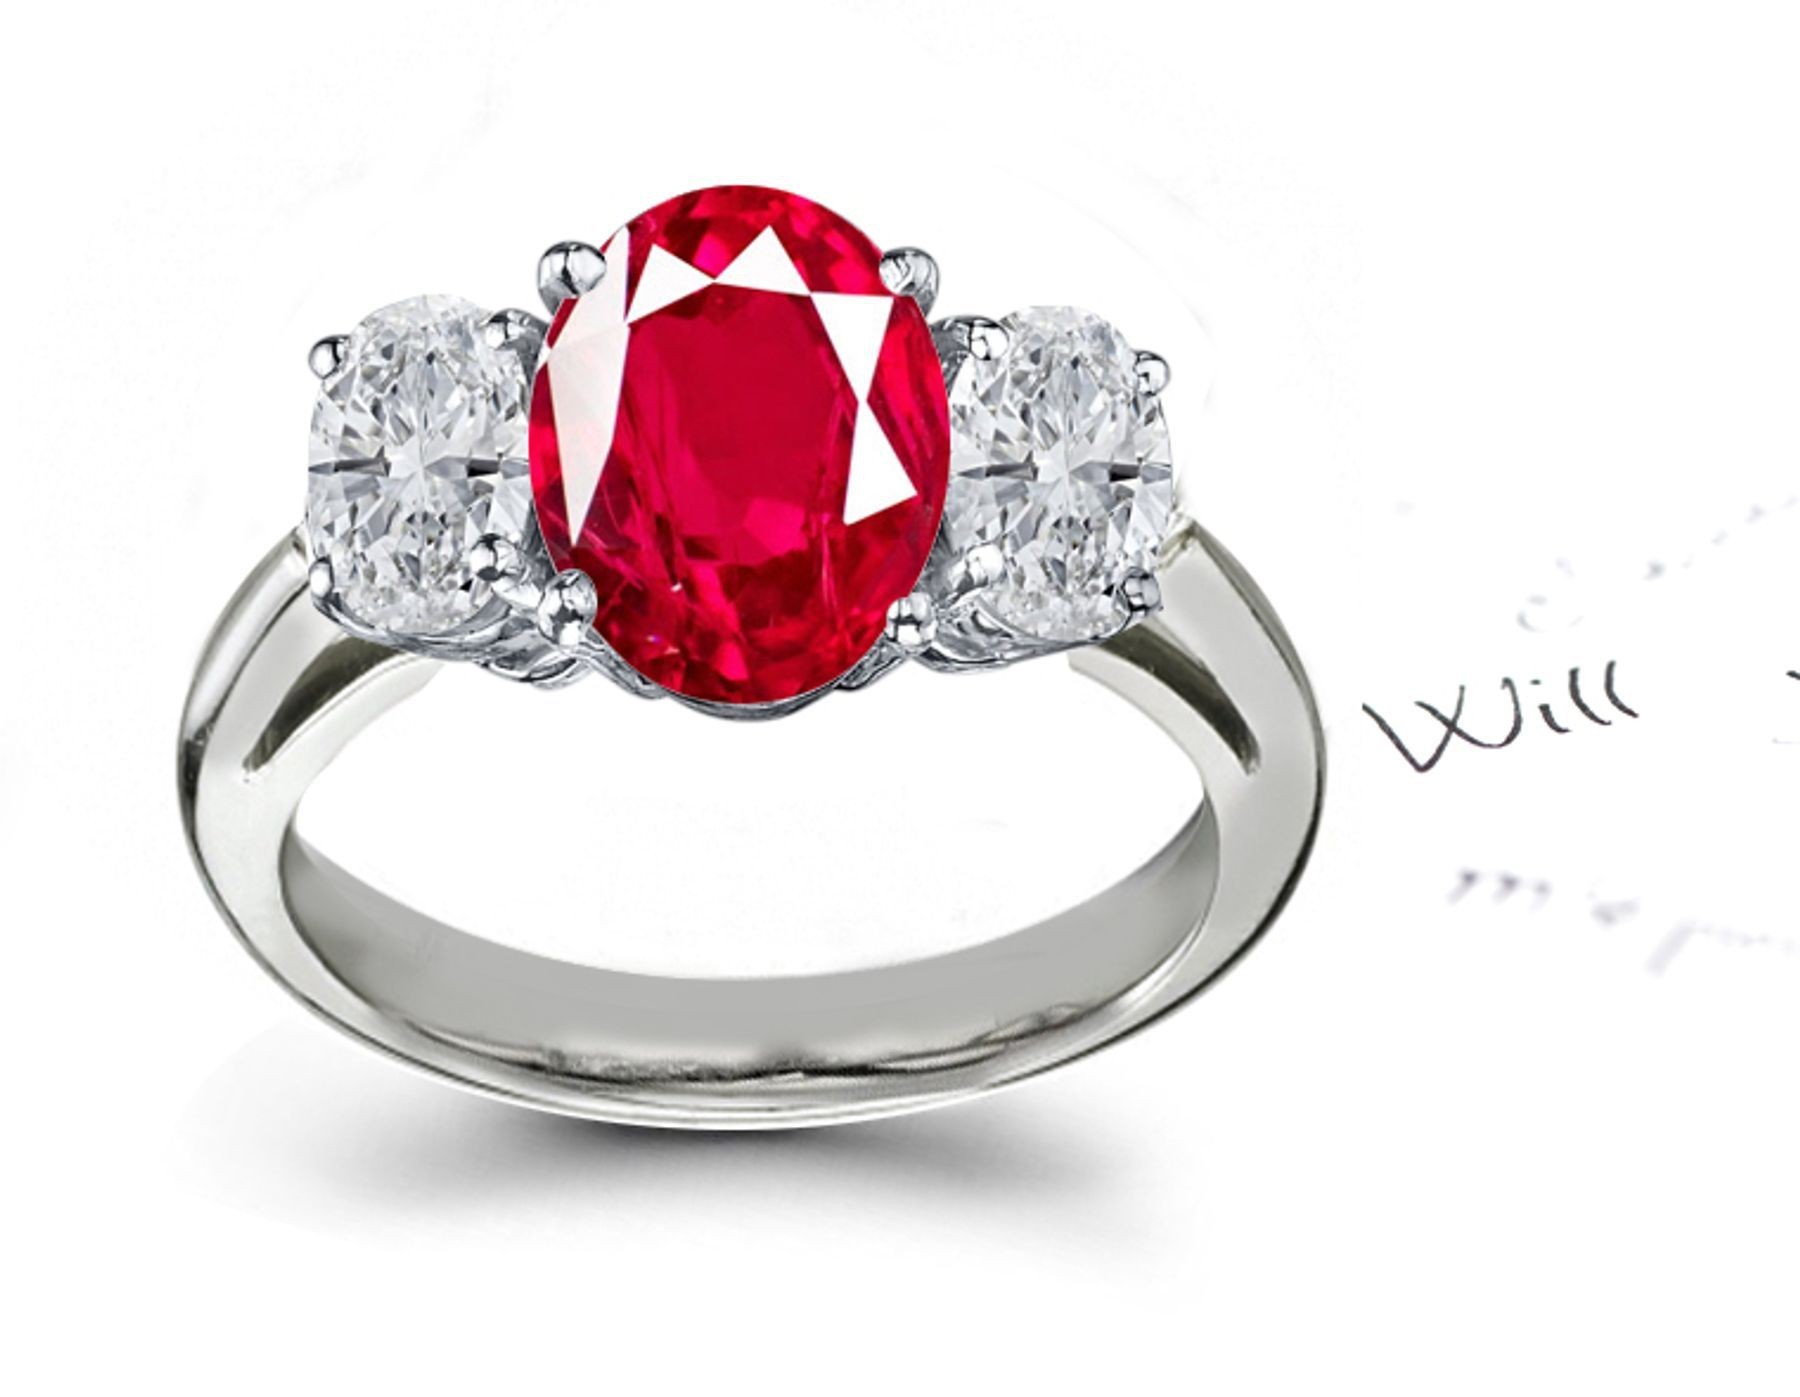 Crimson Red Ruby & Diamond Engagement Ring: Platinum ring with round center diamond & two side round brilliant rubies.